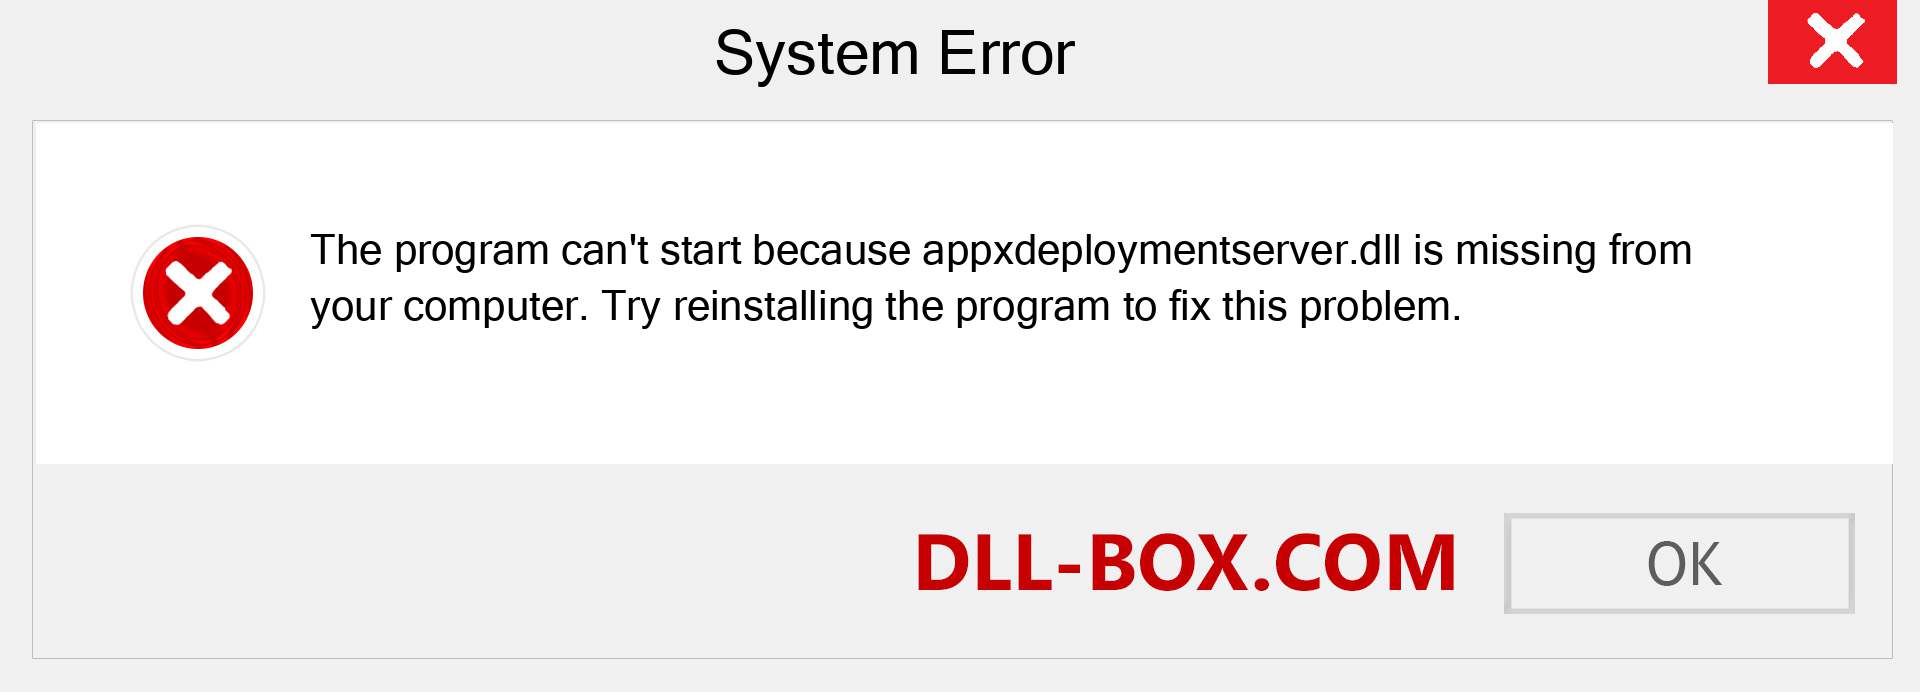  appxdeploymentserver.dll file is missing?. Download for Windows 7, 8, 10 - Fix  appxdeploymentserver dll Missing Error on Windows, photos, images